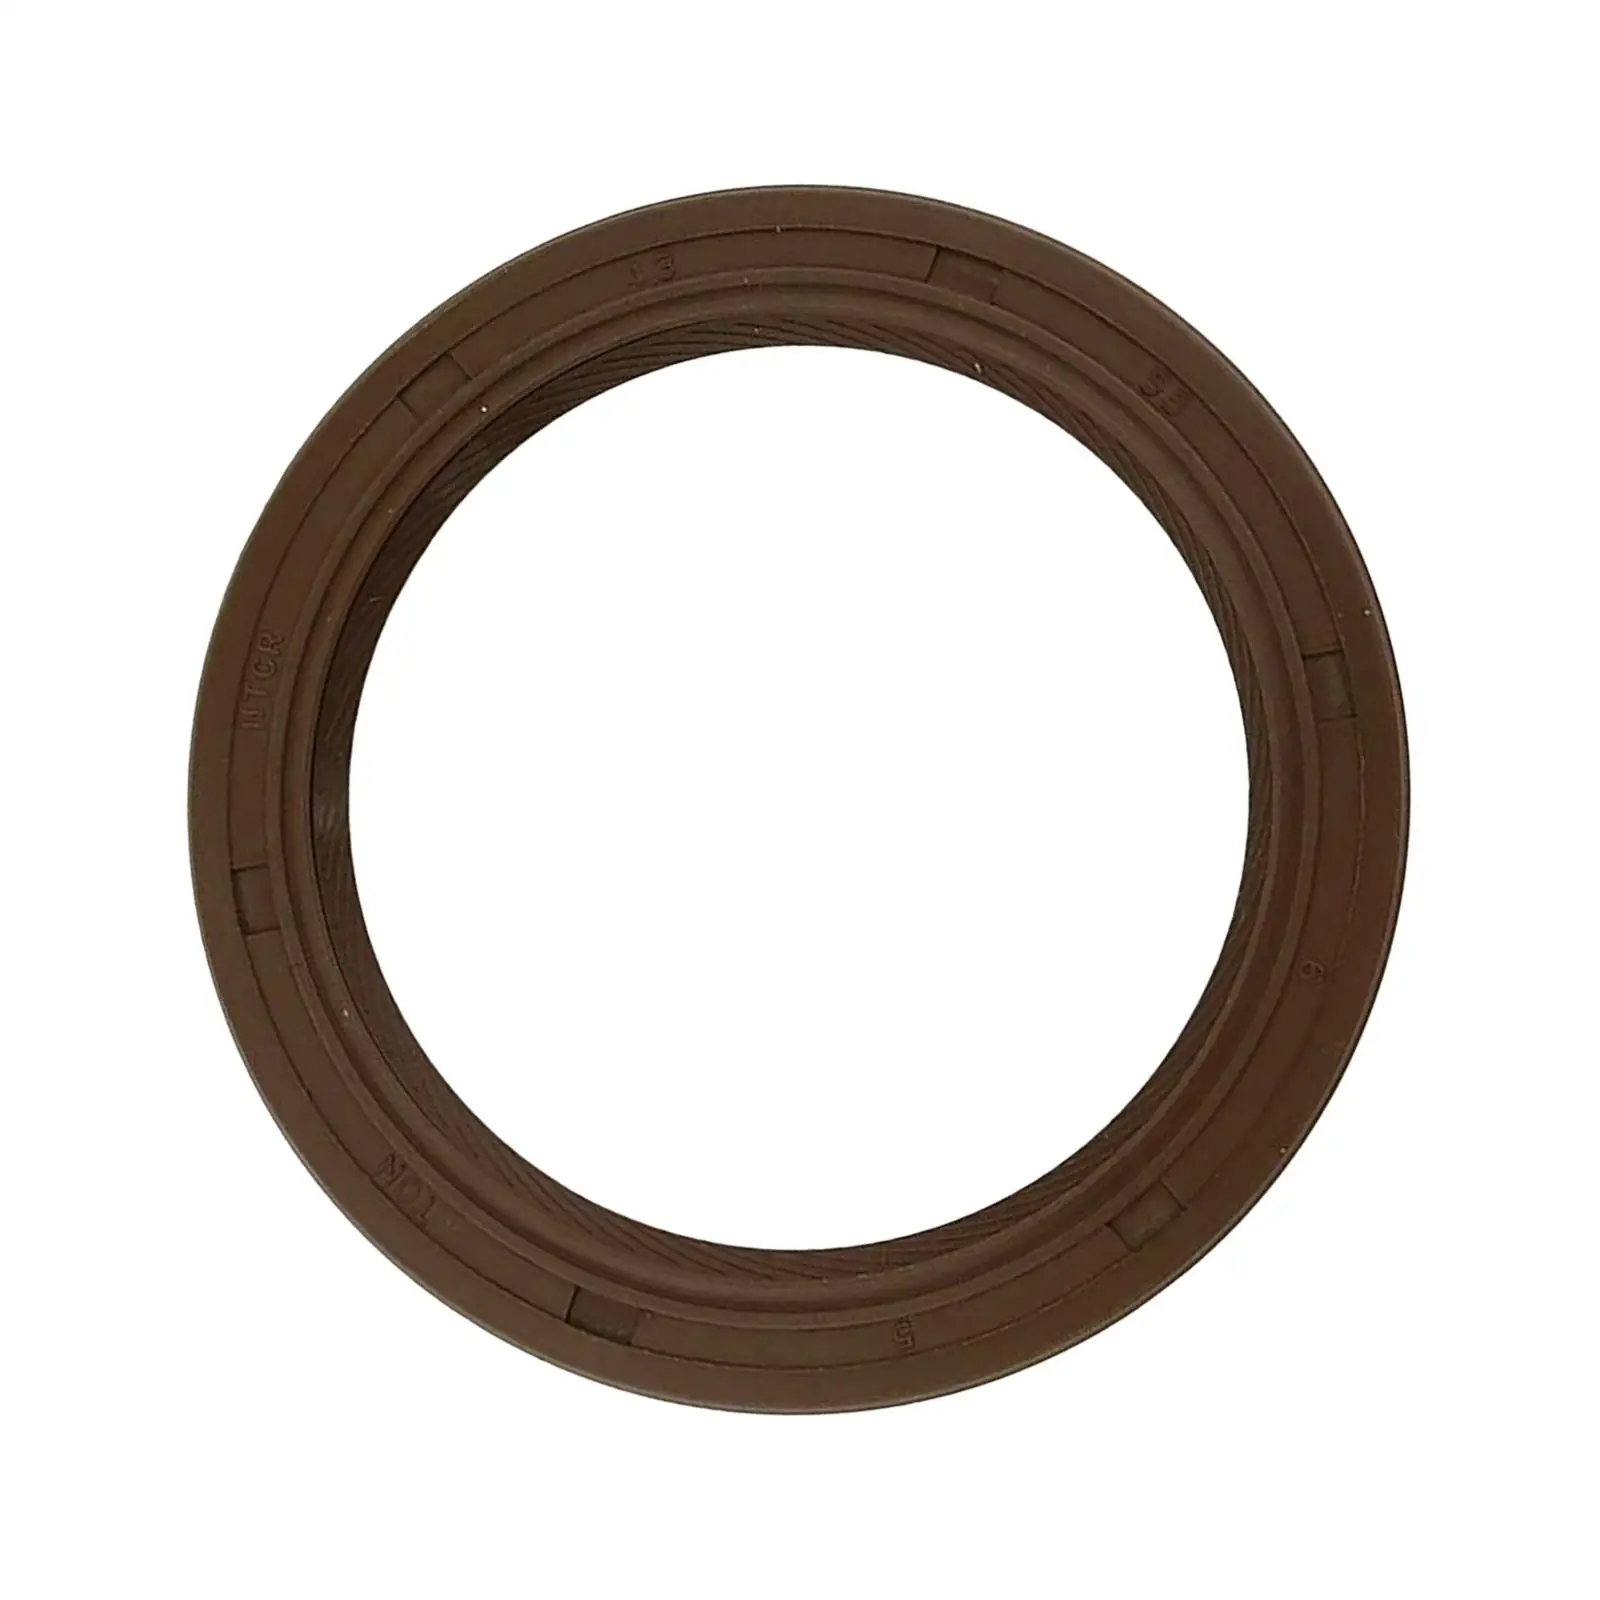 Oil Seal for Yamaha Outboard 25HP 30HP 40HP 50HP 60HP 4 Stroke Easily to Install Boat Engine Parts Professional